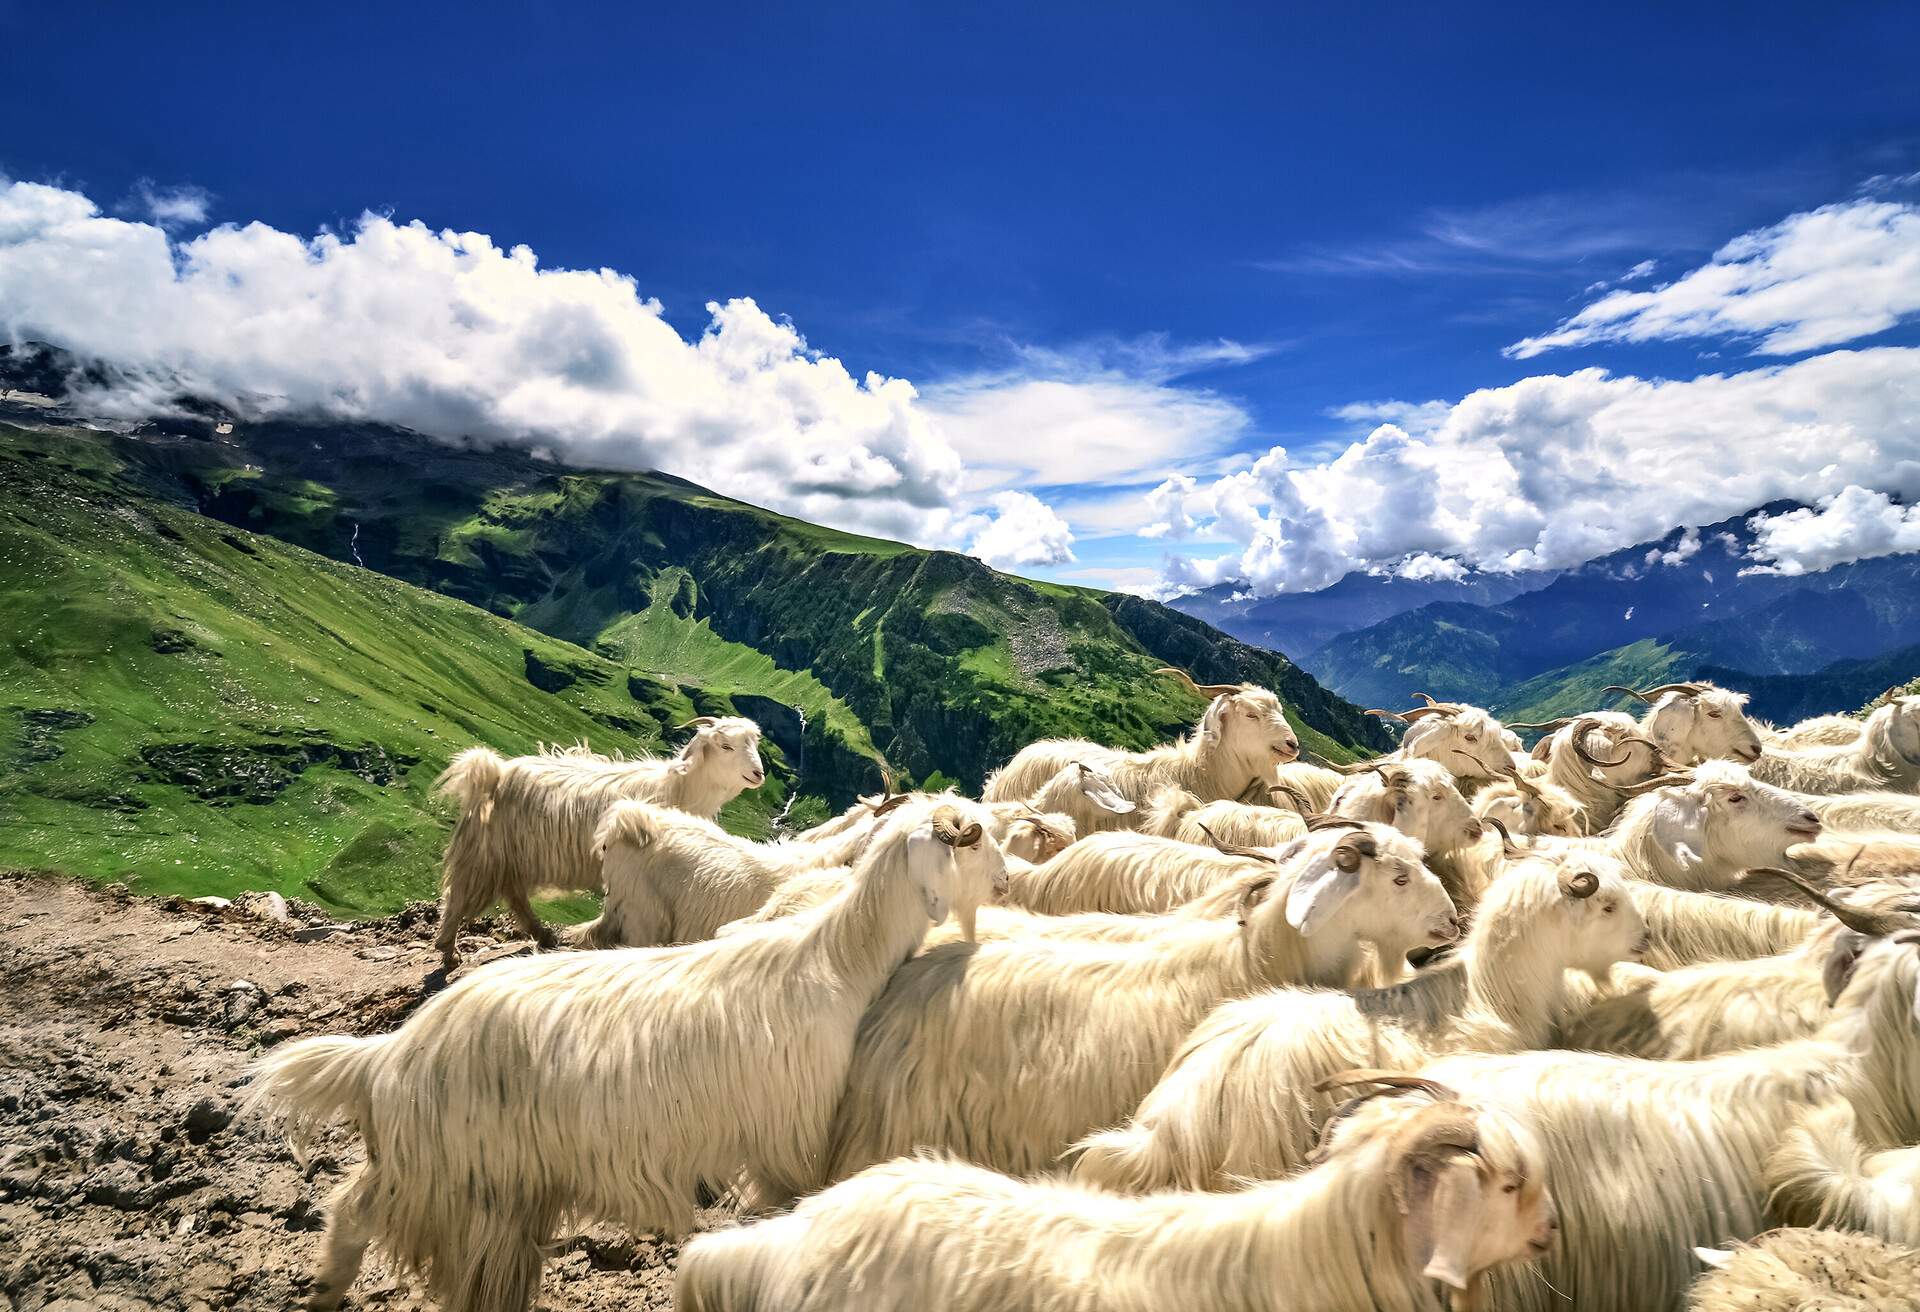 Landscape in Manali, Himachal Pradesh, India with herd of sheep